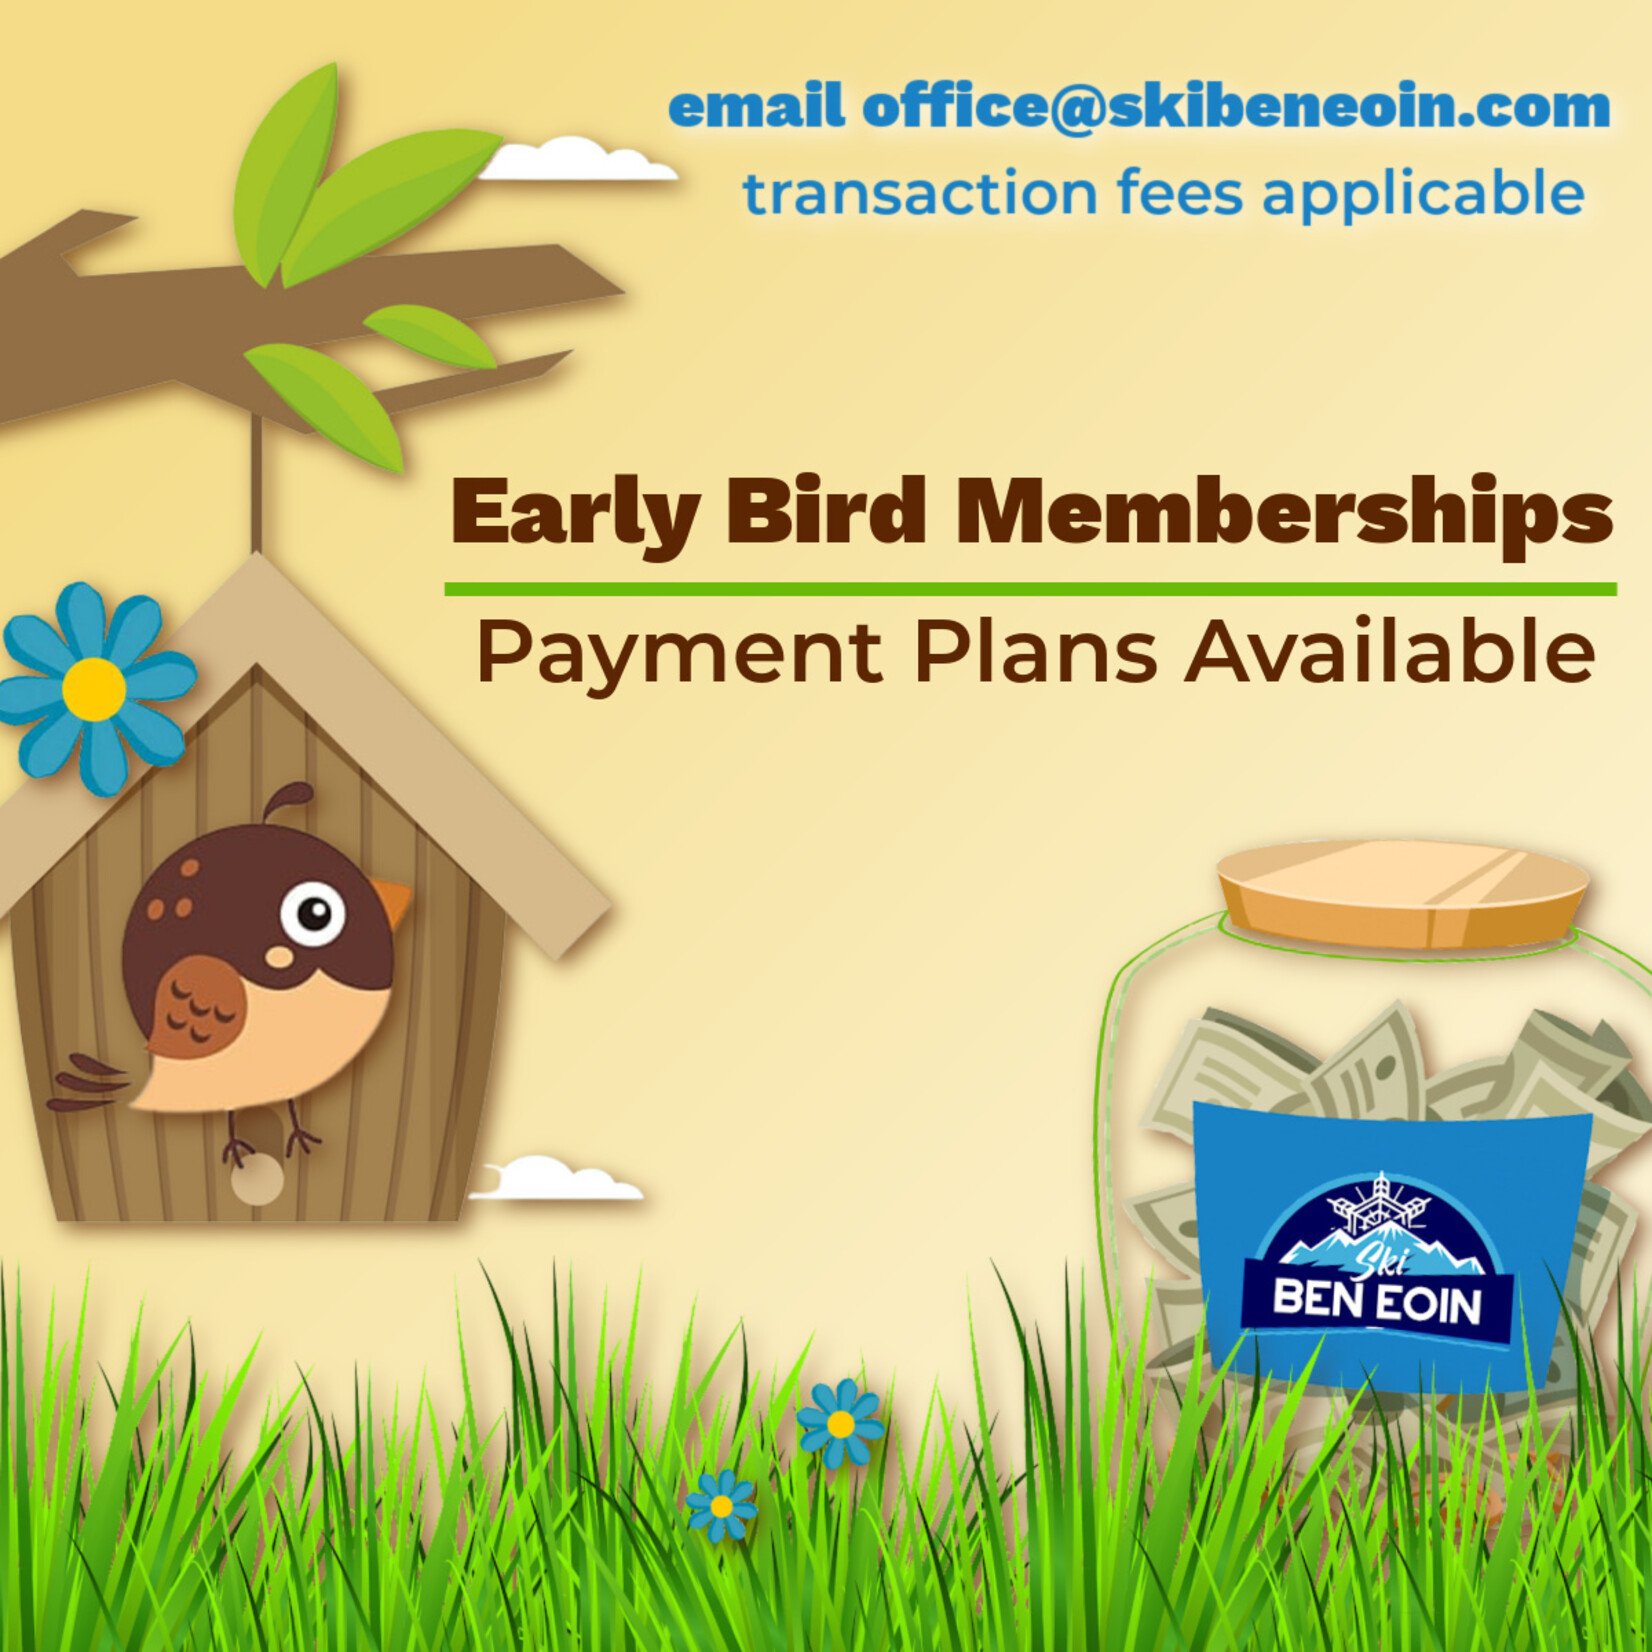 Early Bird Ages 5 & Under Membership 2025